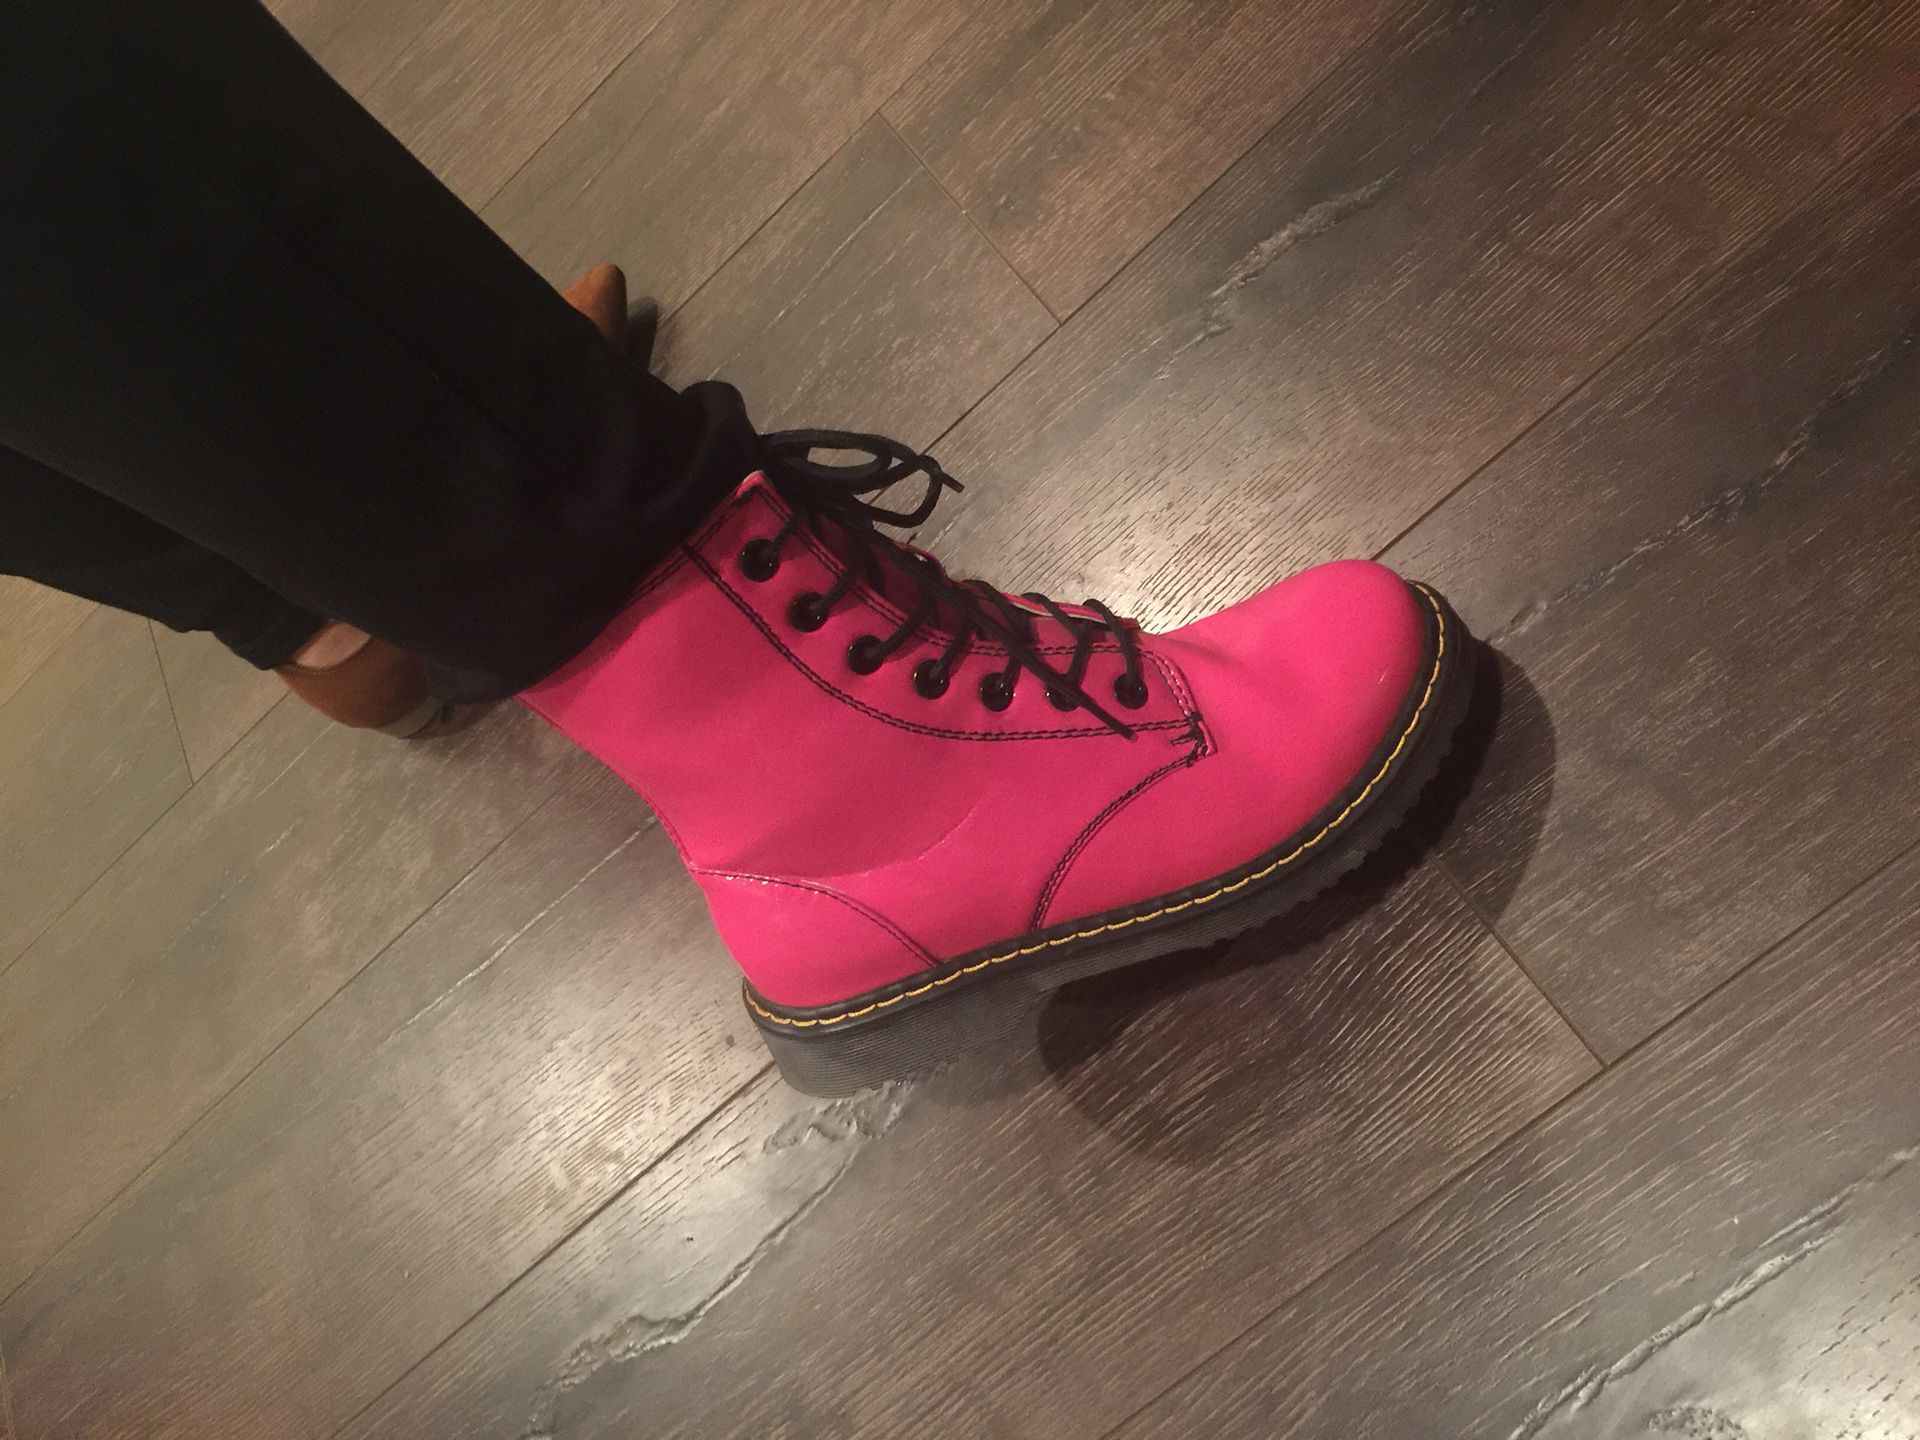 Cute Pink boots